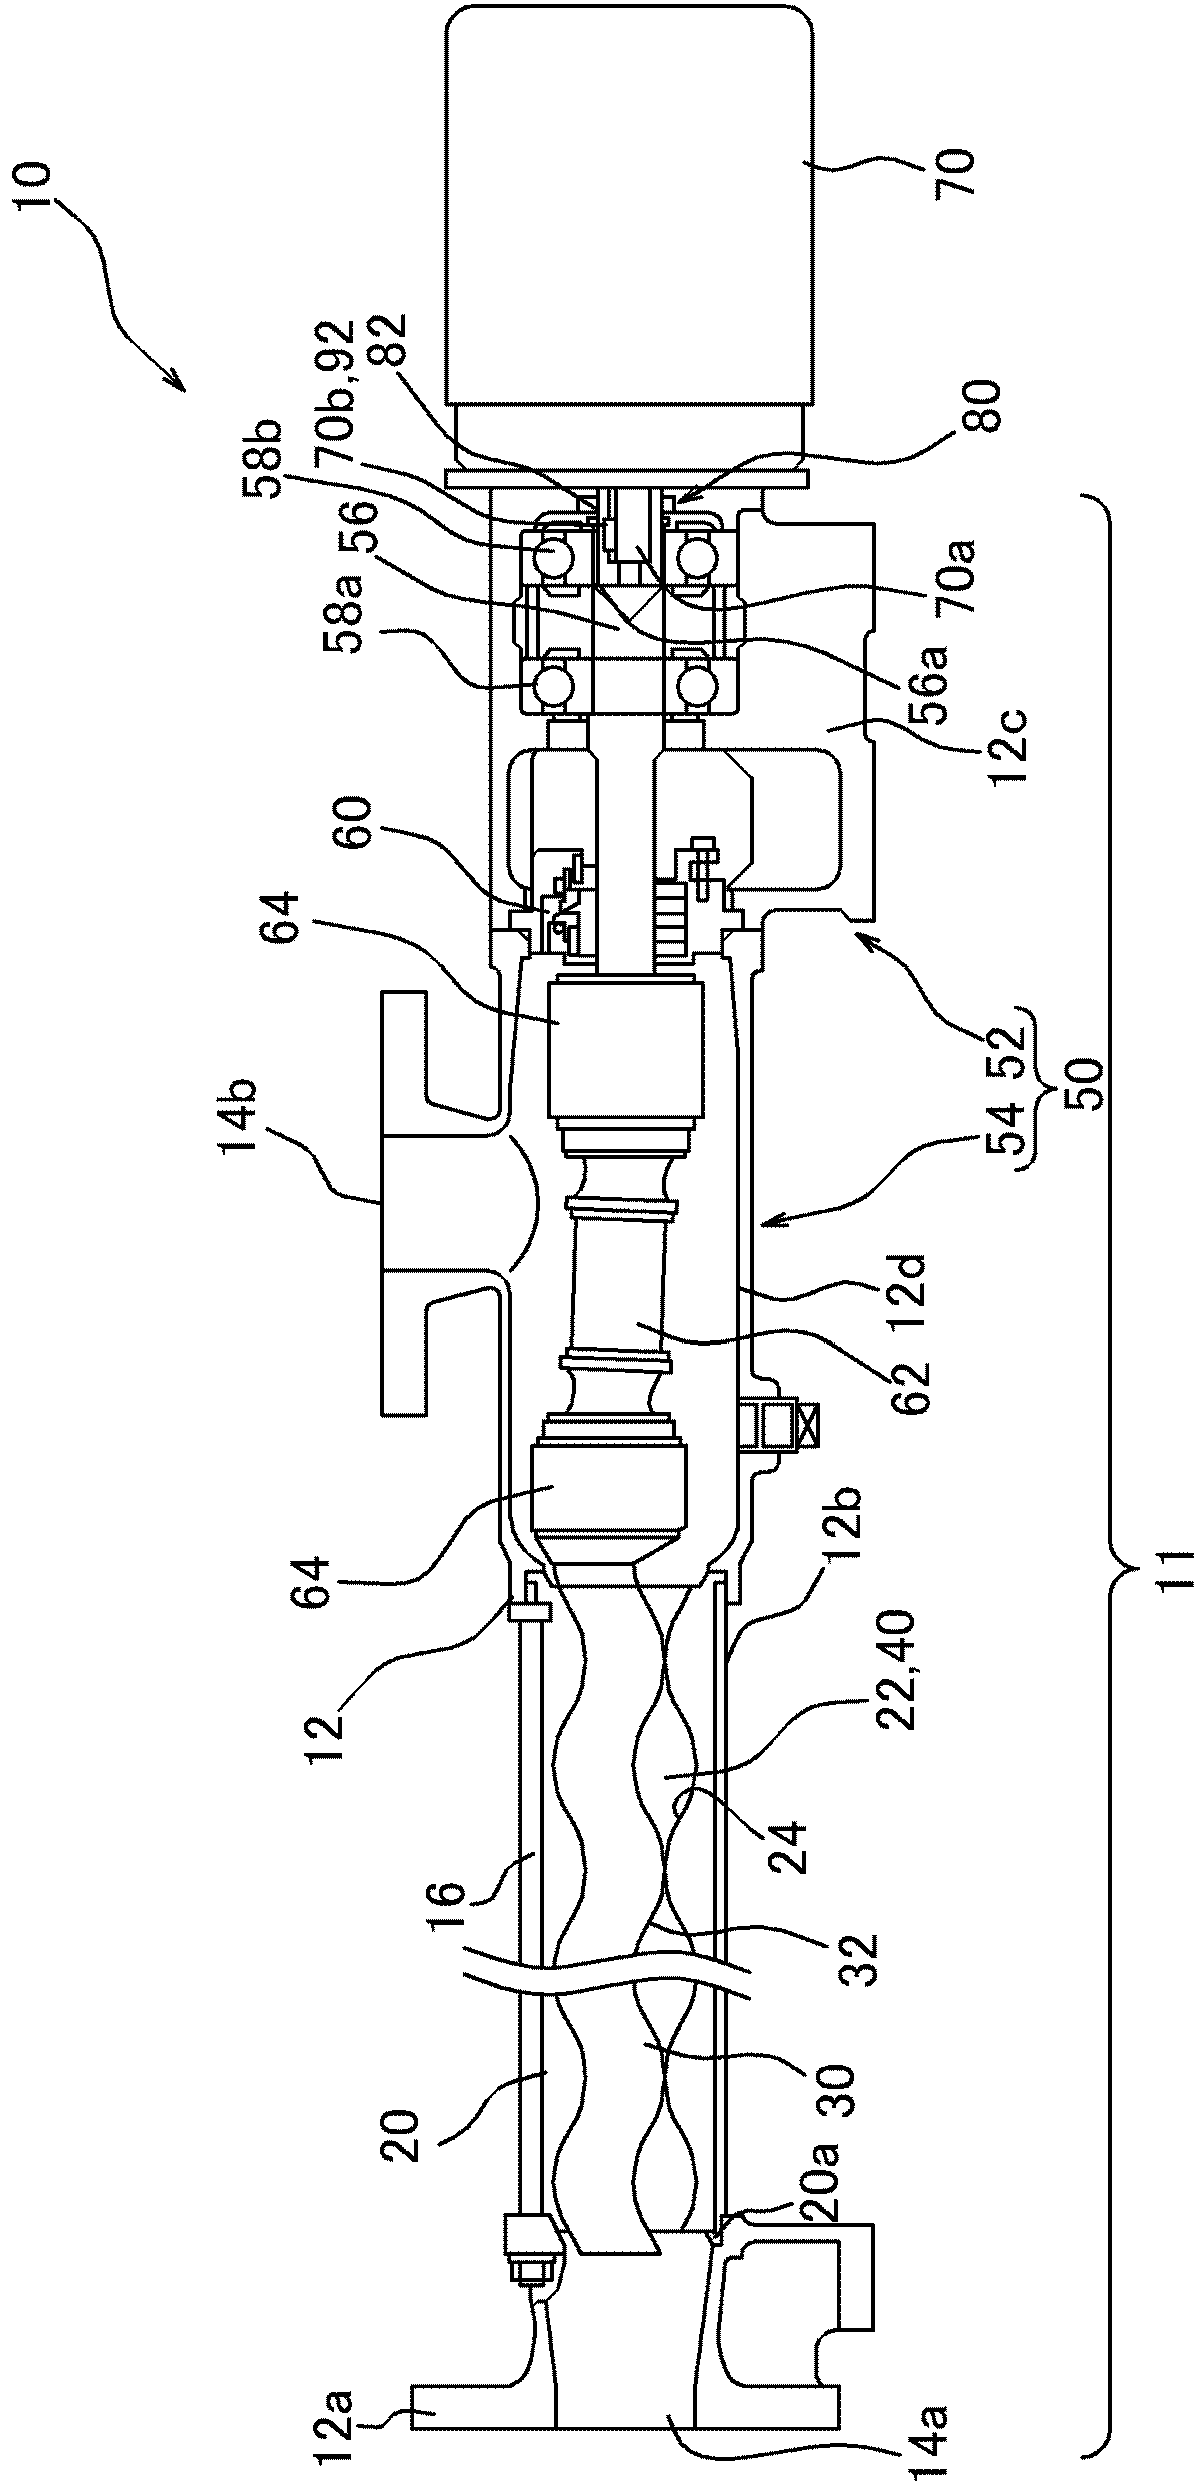 Buffering member, shaft coupled structure, and a uniaxial eccentric screw pump